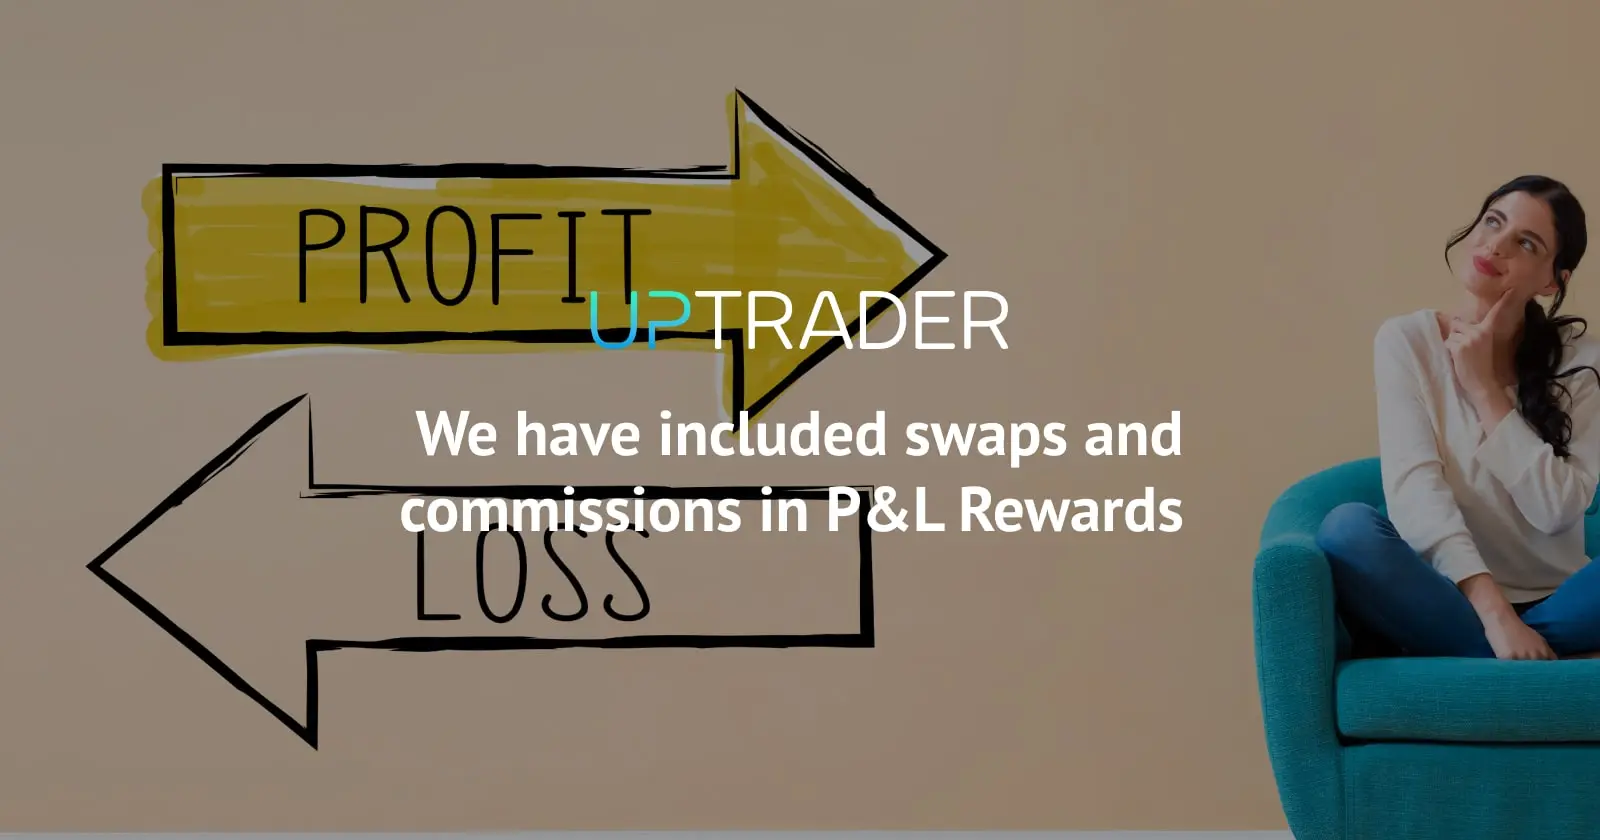 We include swaps and commissions in P&L Rewards